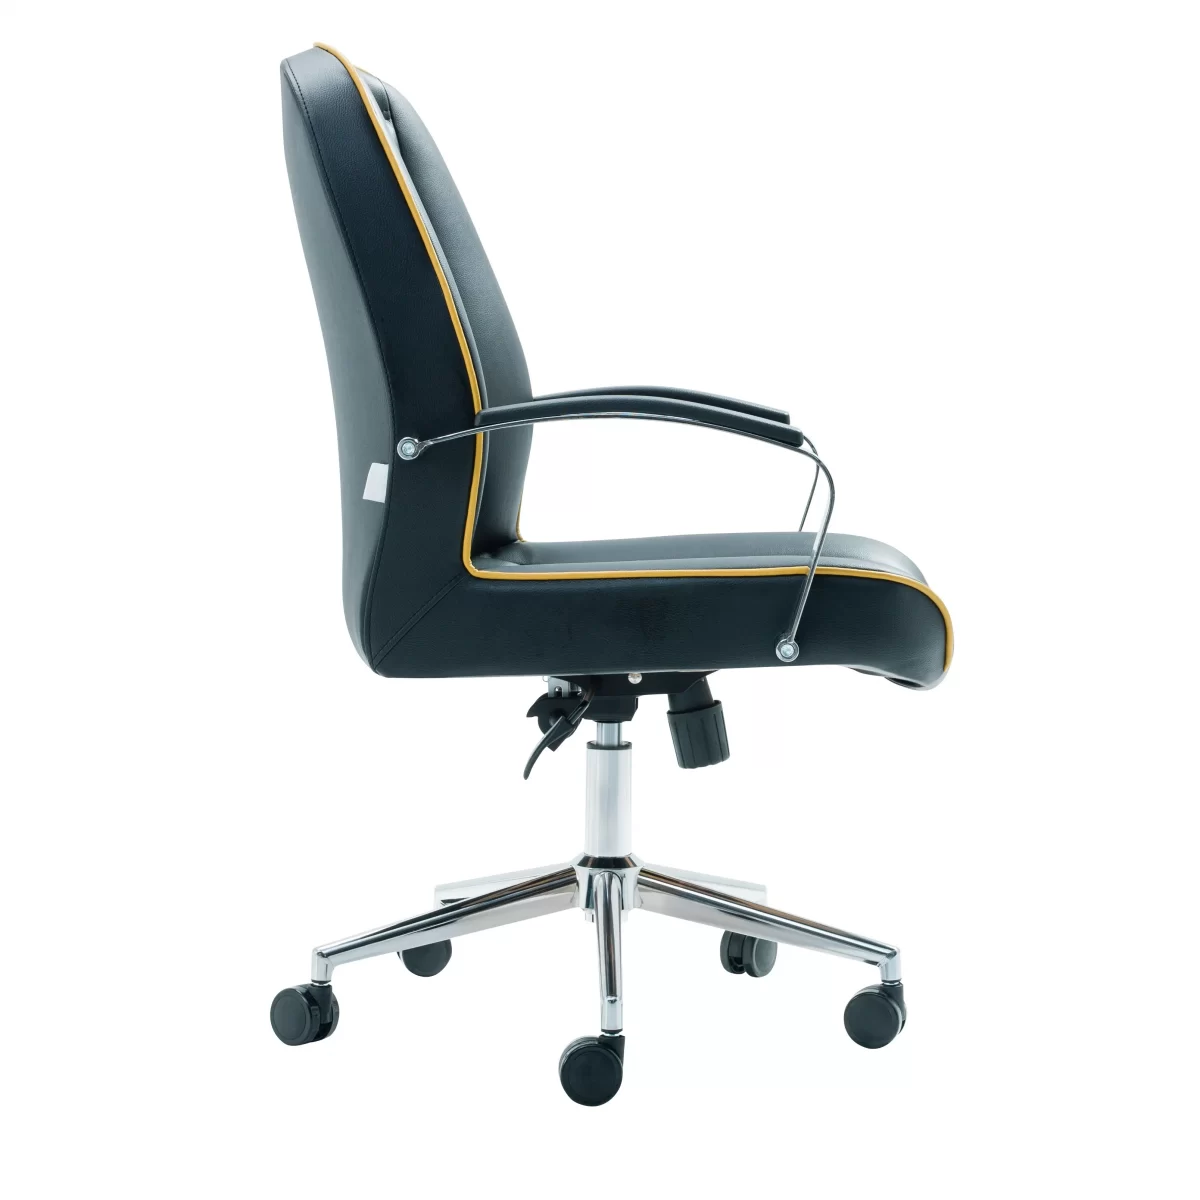 Karina Manager Office Chair Modern Office Chairs Turkey 3 scaled